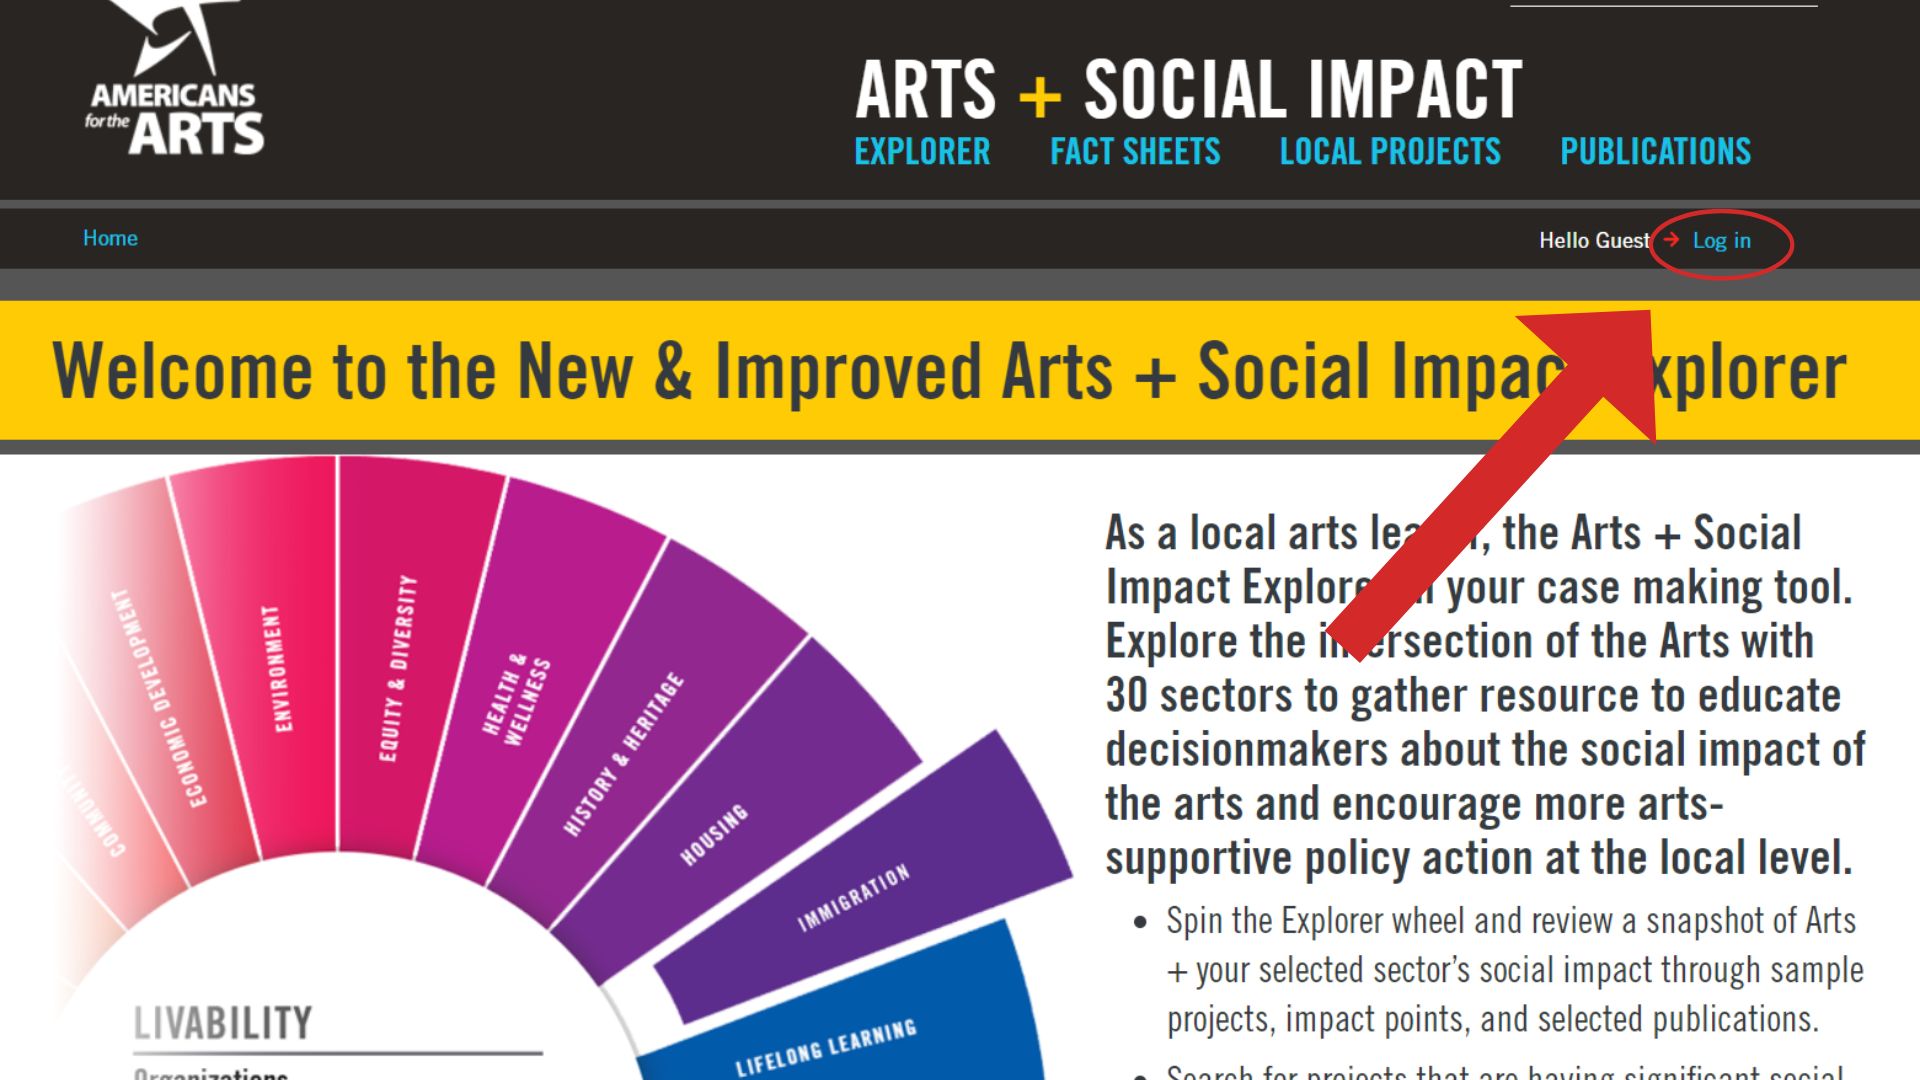 A webpage with a black heading, yellow banner and white background. The webpage features text about the Arts and Social Impact Explorer as well as a cropped image of the wheel. The wheel features different shades of red and purple with text on the slices of the wheel. There is a red arrow pointing to a red circle in the upper right hand corner. Within the red circle are blue words that say log in.